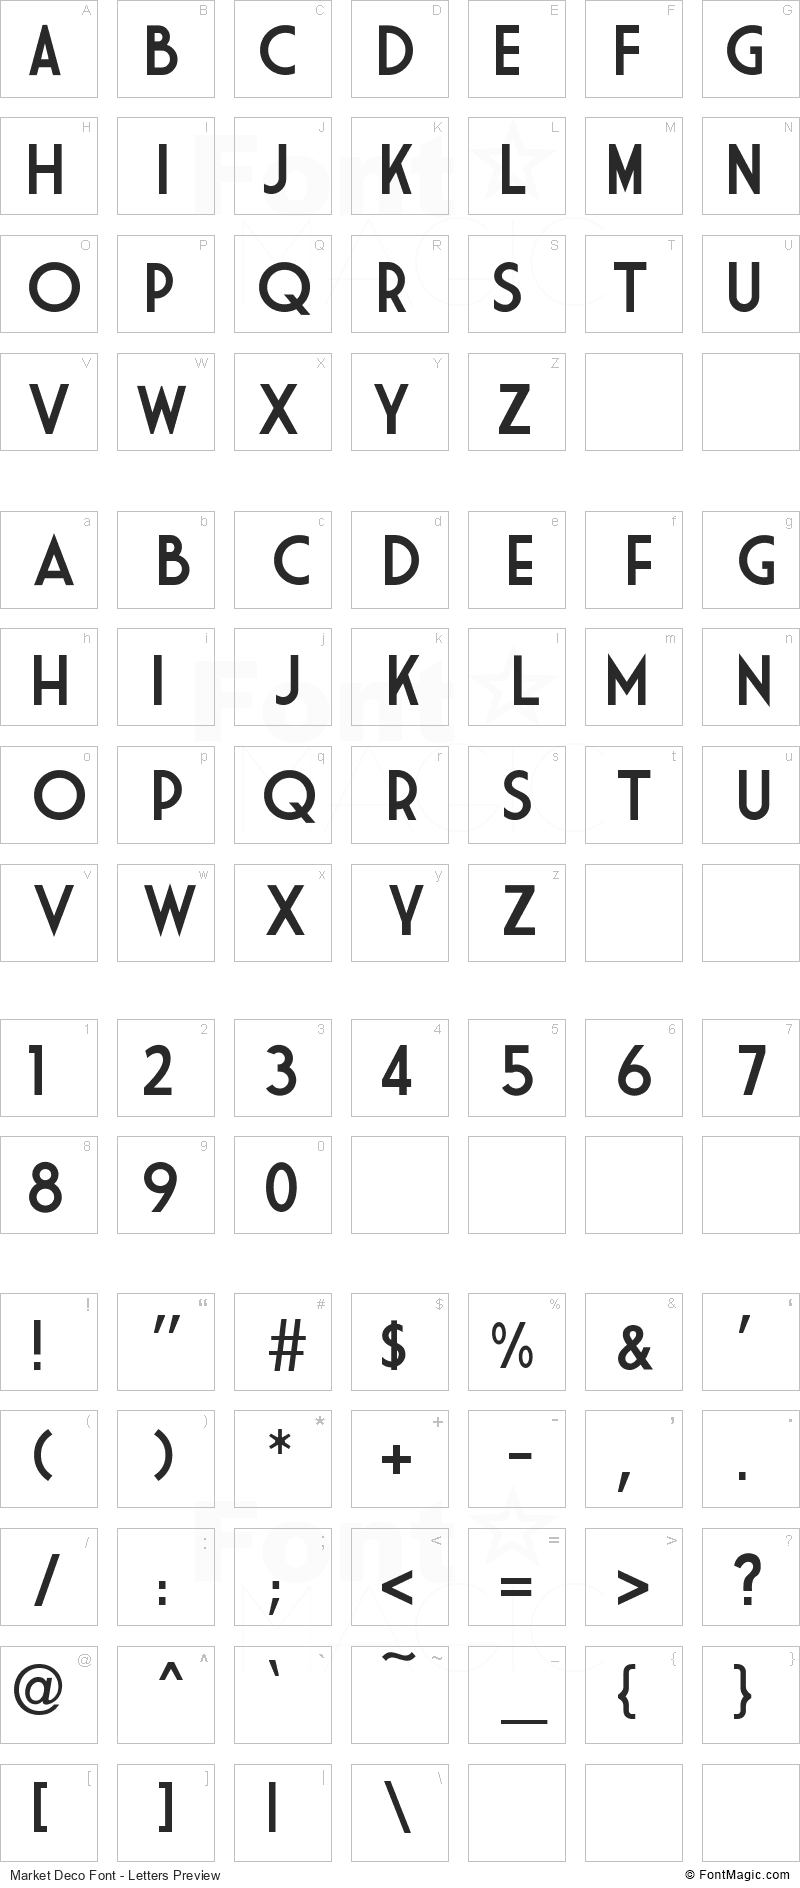 Market Deco Font - All Latters Preview Chart